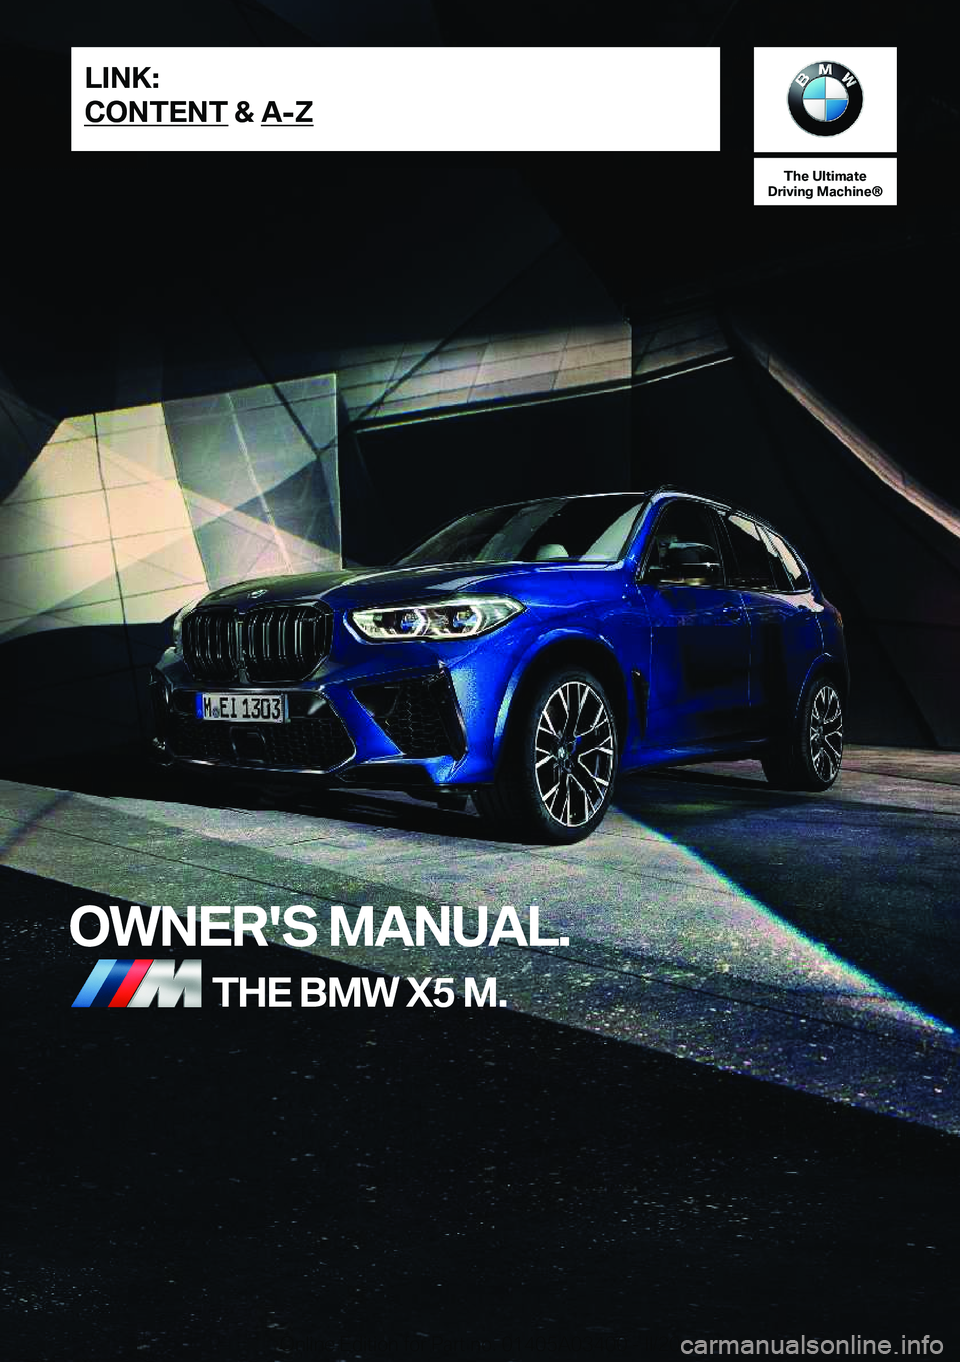 BMW X5M 2020  Owners Manual �T�h�e��U�l�t�i�m�a�t�e
�D�r�i�v�i�n�g��M�a�c�h�i�n�e�n
�O�W�N�E�R�'�S��M�A�N�U�A�L�.�T�H�E��B�M�W��X�5��M�.�L�I�N�K�:
�C�O�N�T�E�N�T��&��A�-�Z�O�n�l�i�n�e��E�d�i�t�i�o�n��f�o�r��P�a�r�